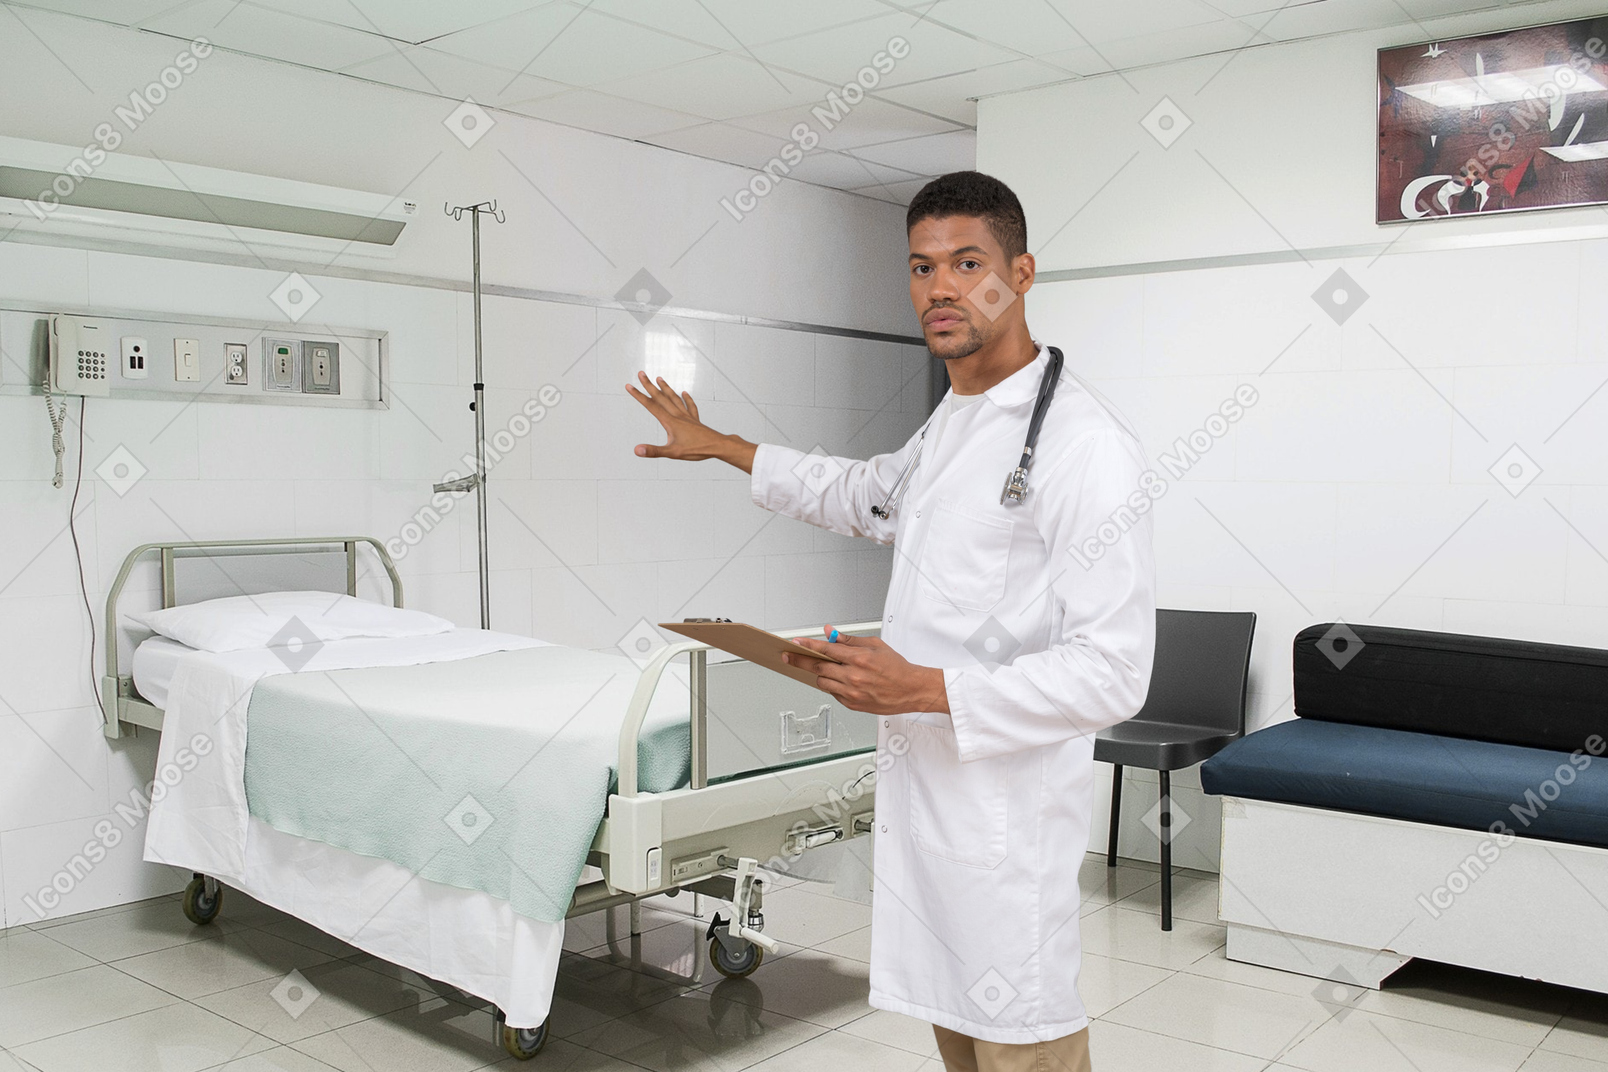 A male doctor standing next to a bed in a hospital room